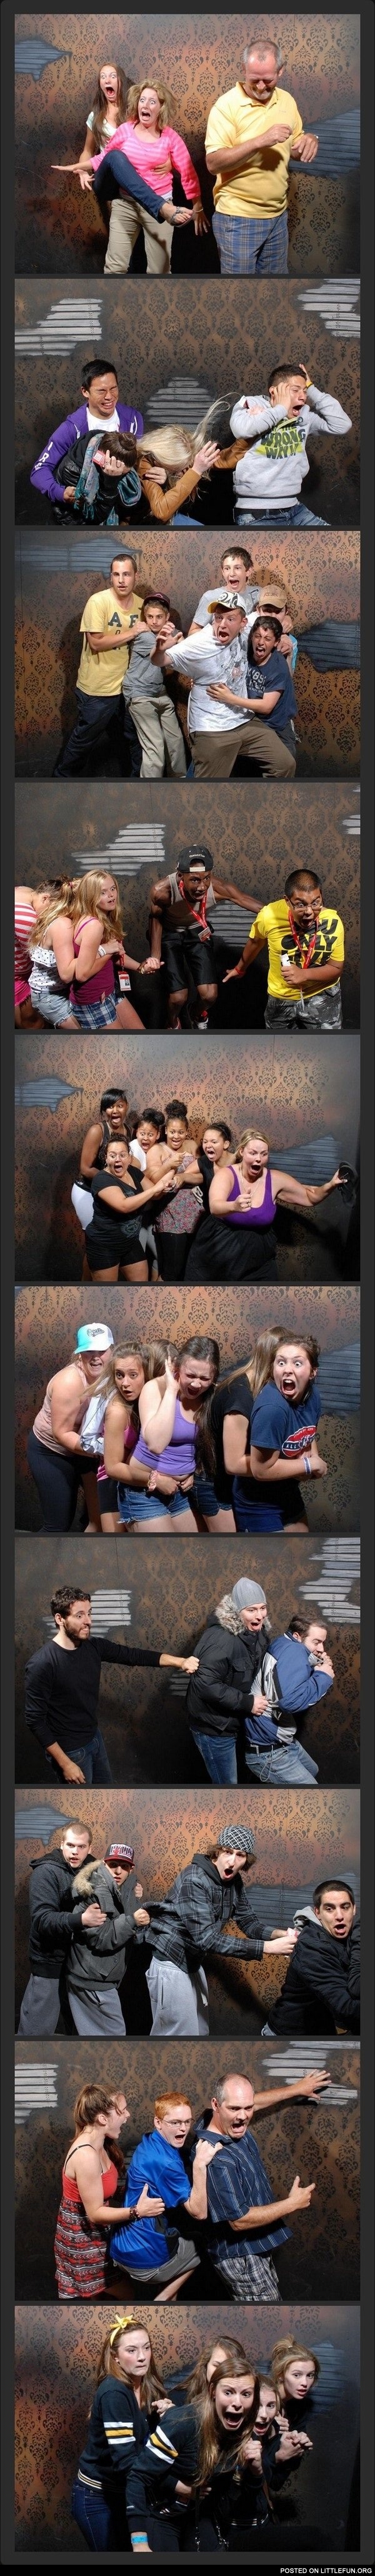 Haunted house reactions